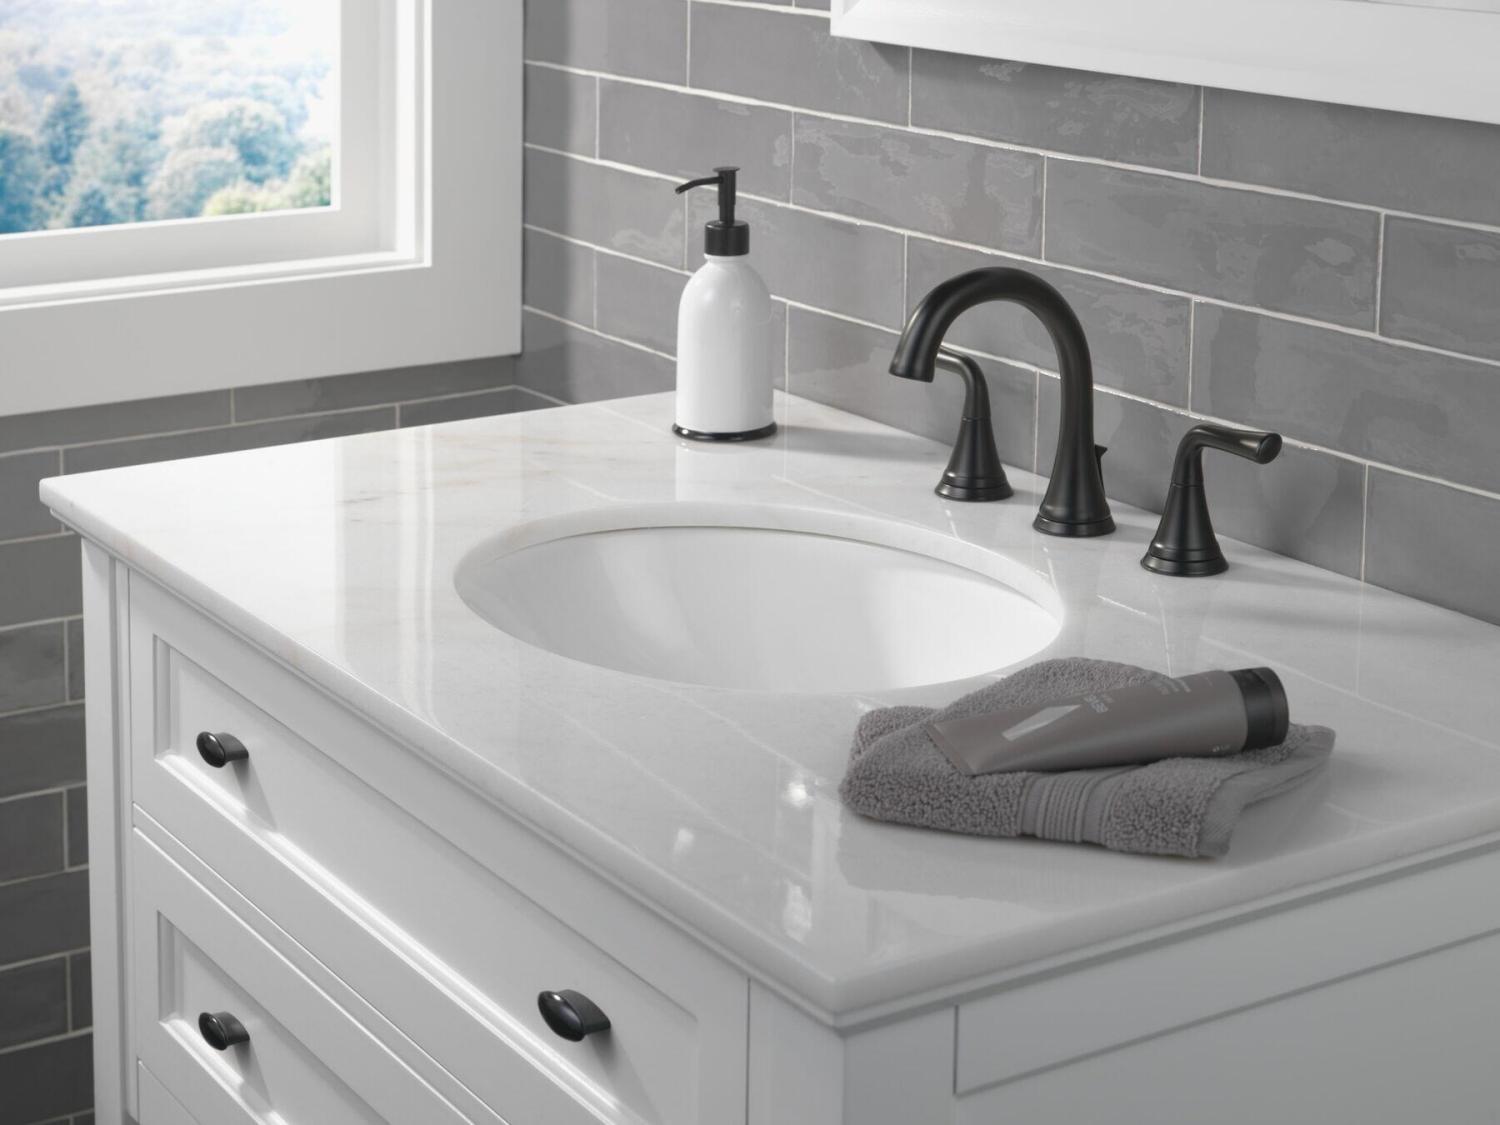 The Unveiled Dilemma of Peeling Brushed Nickel Faucets - Blog - 3